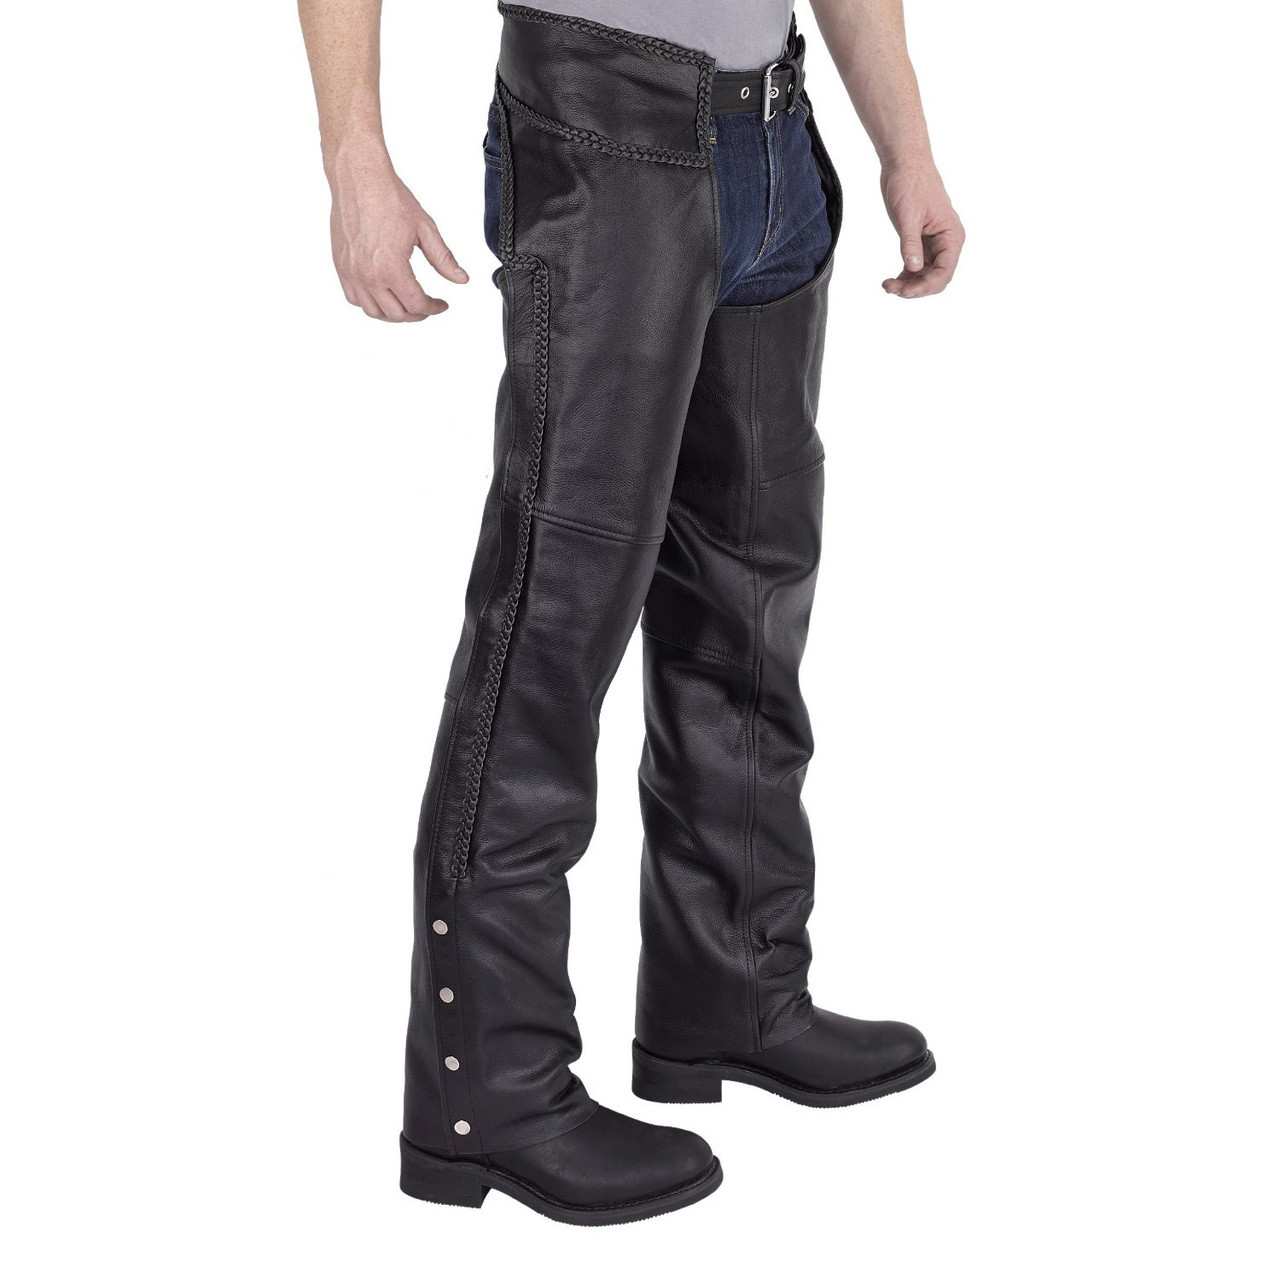 4Fit Unisex Braided Black Leather Biker Motorcycle Chaps New All Sizes 4XL